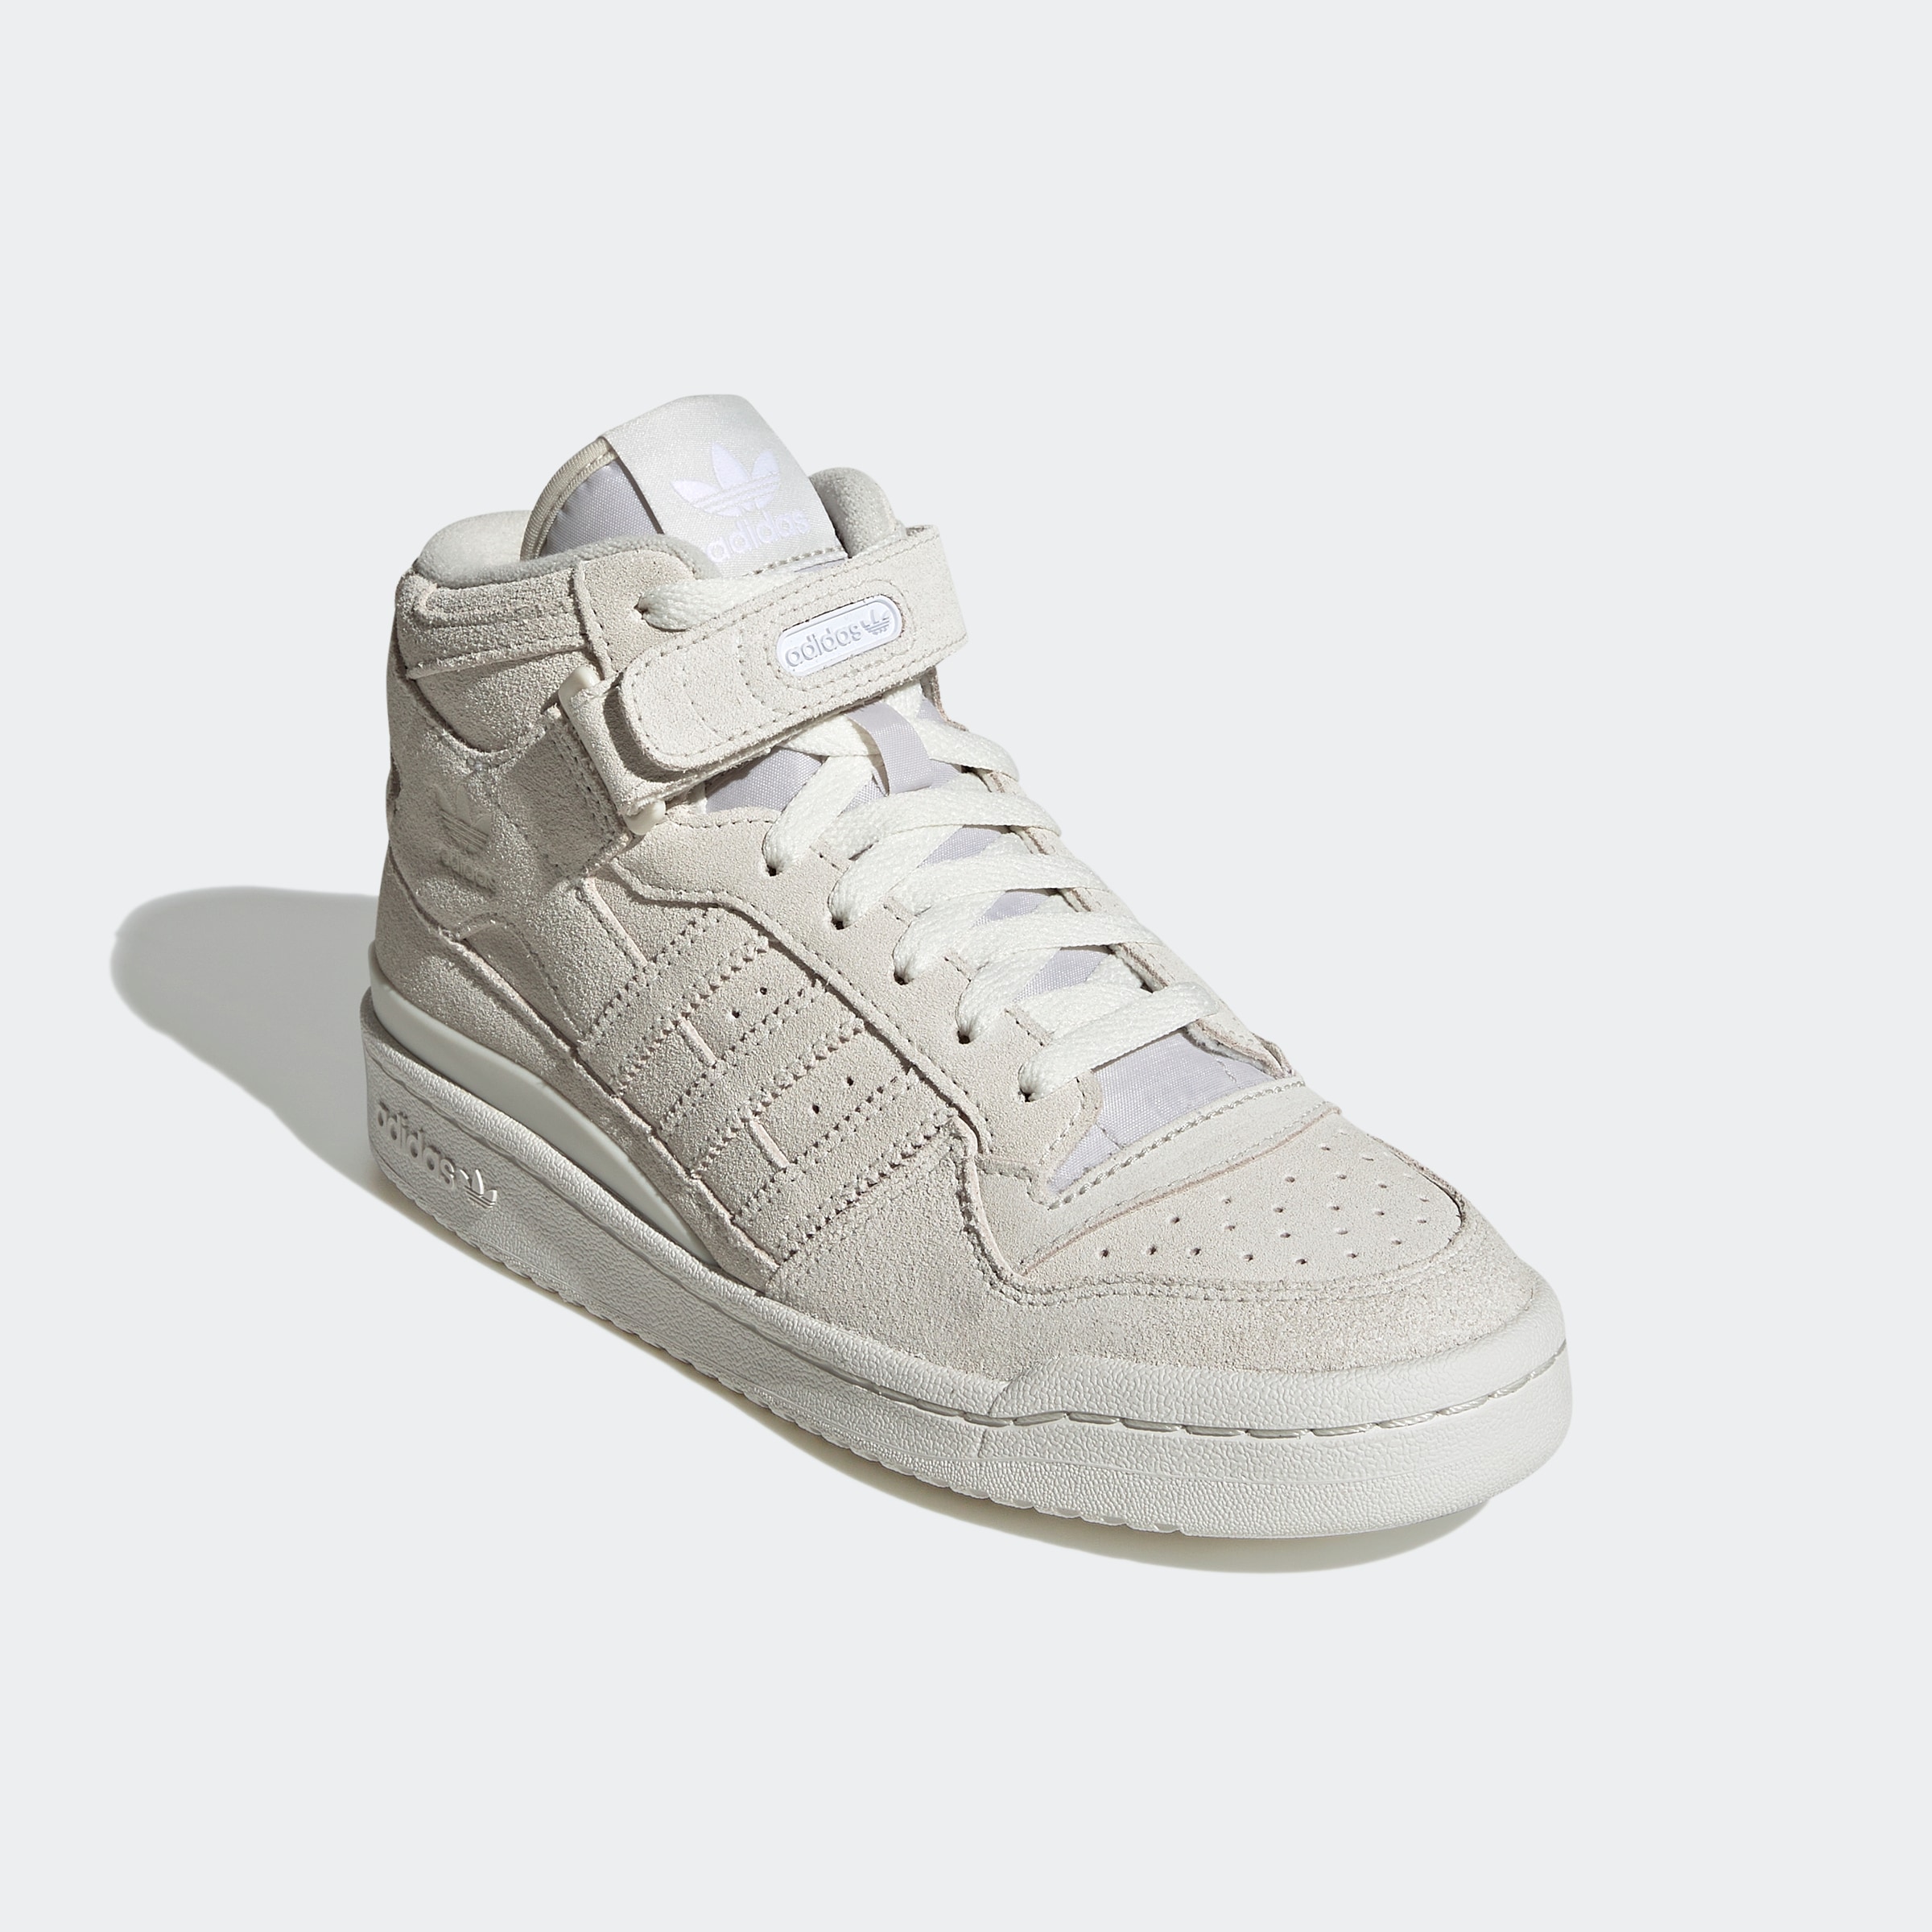 Adidas Originals Forum Mid Sneakers in White and Gray